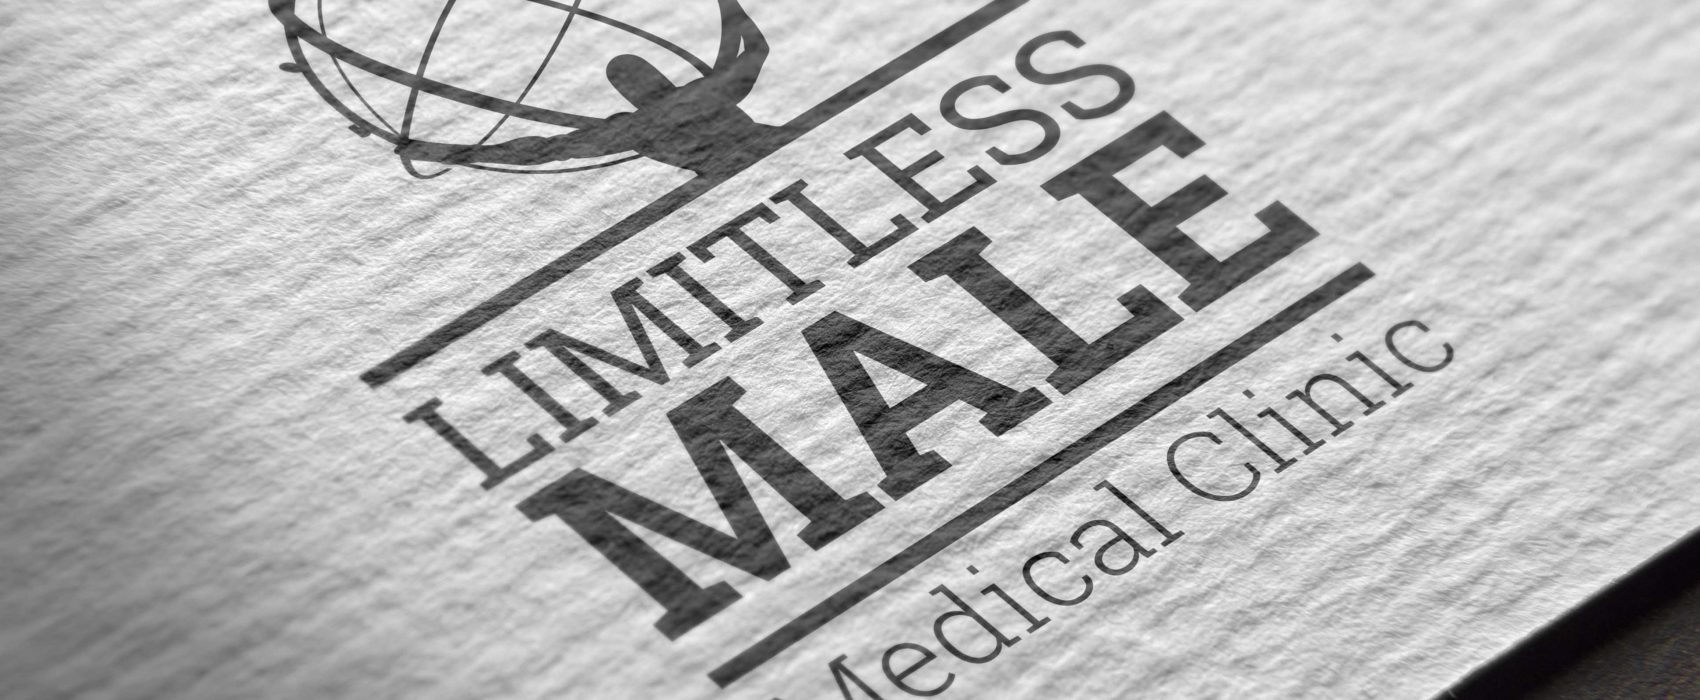 Limitless Male Medical Clinic in Omaha, NE